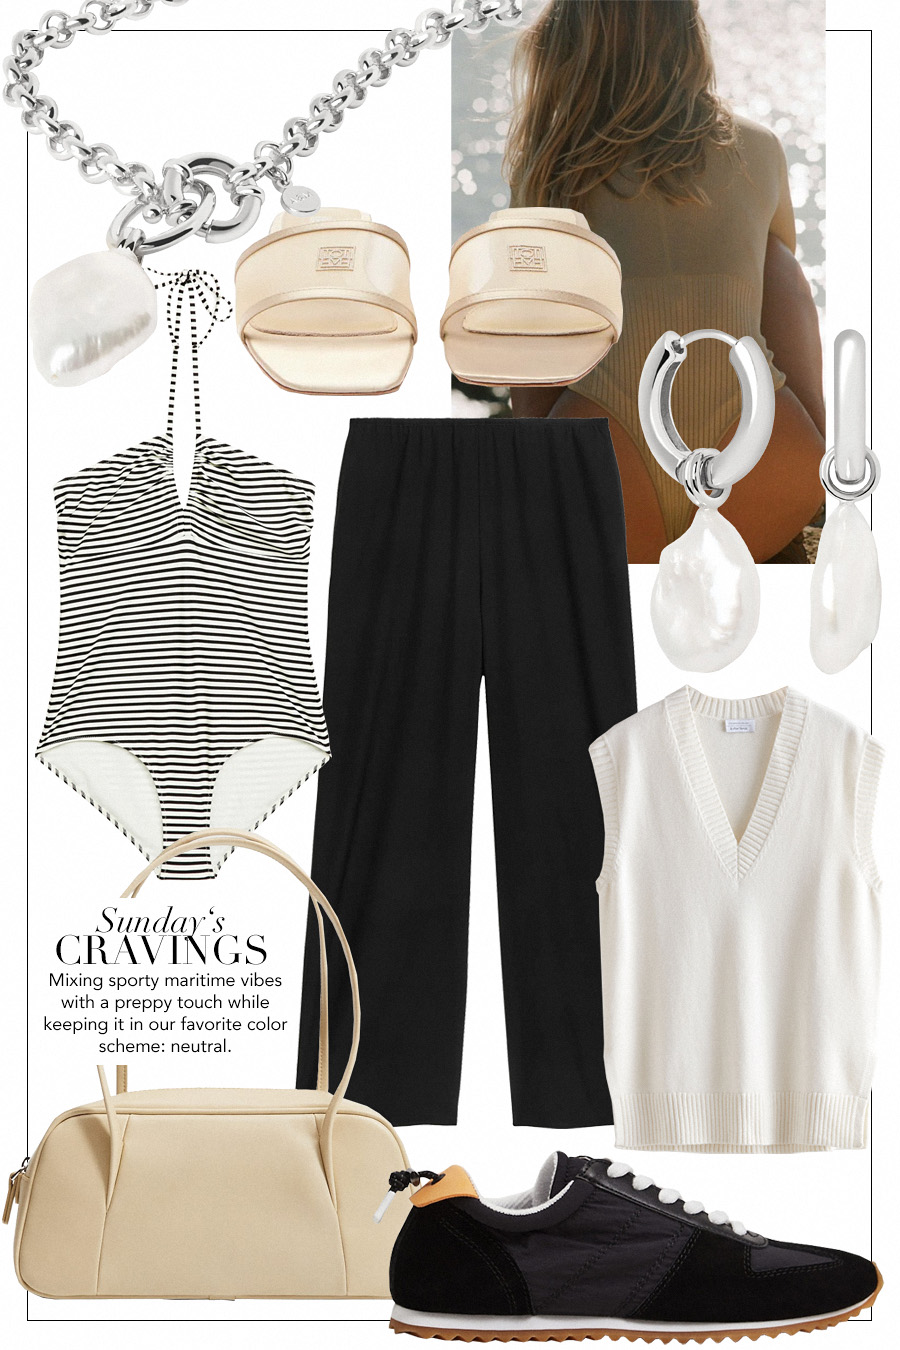 Sunday’s Cravings: Neutral Maritime